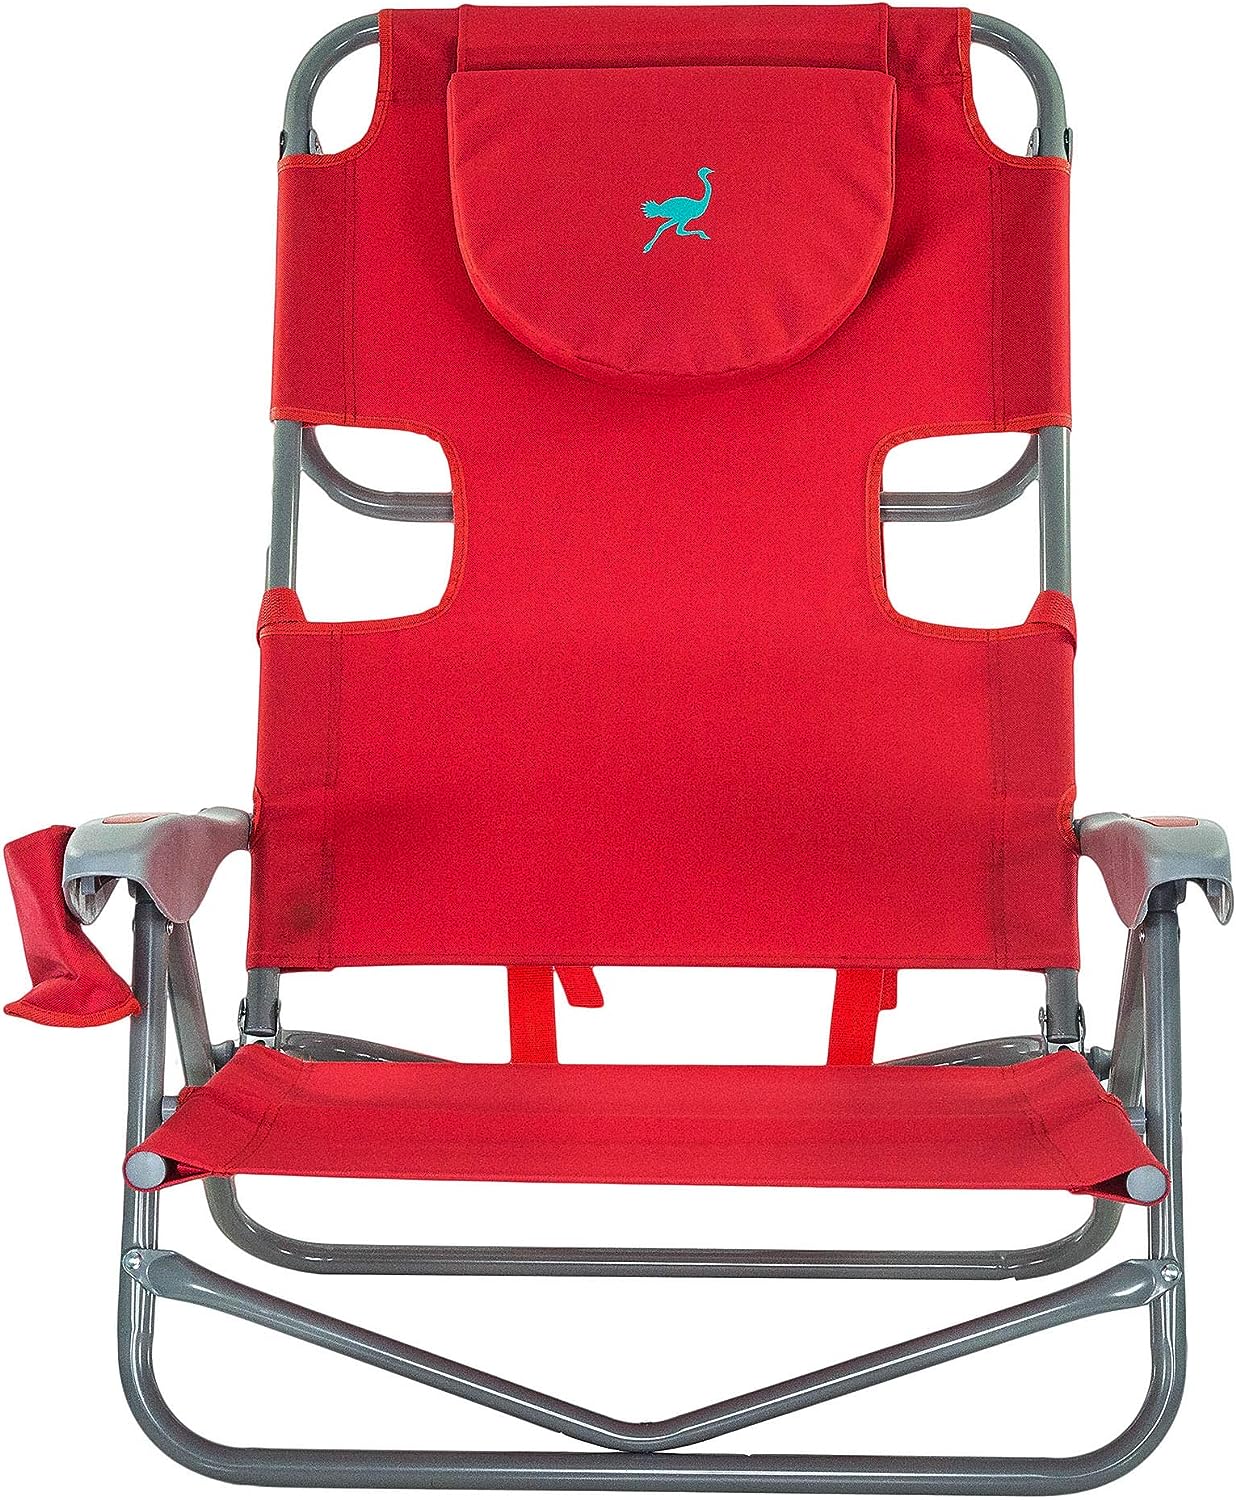 Ostrich On Your Back Chair, Red - $45